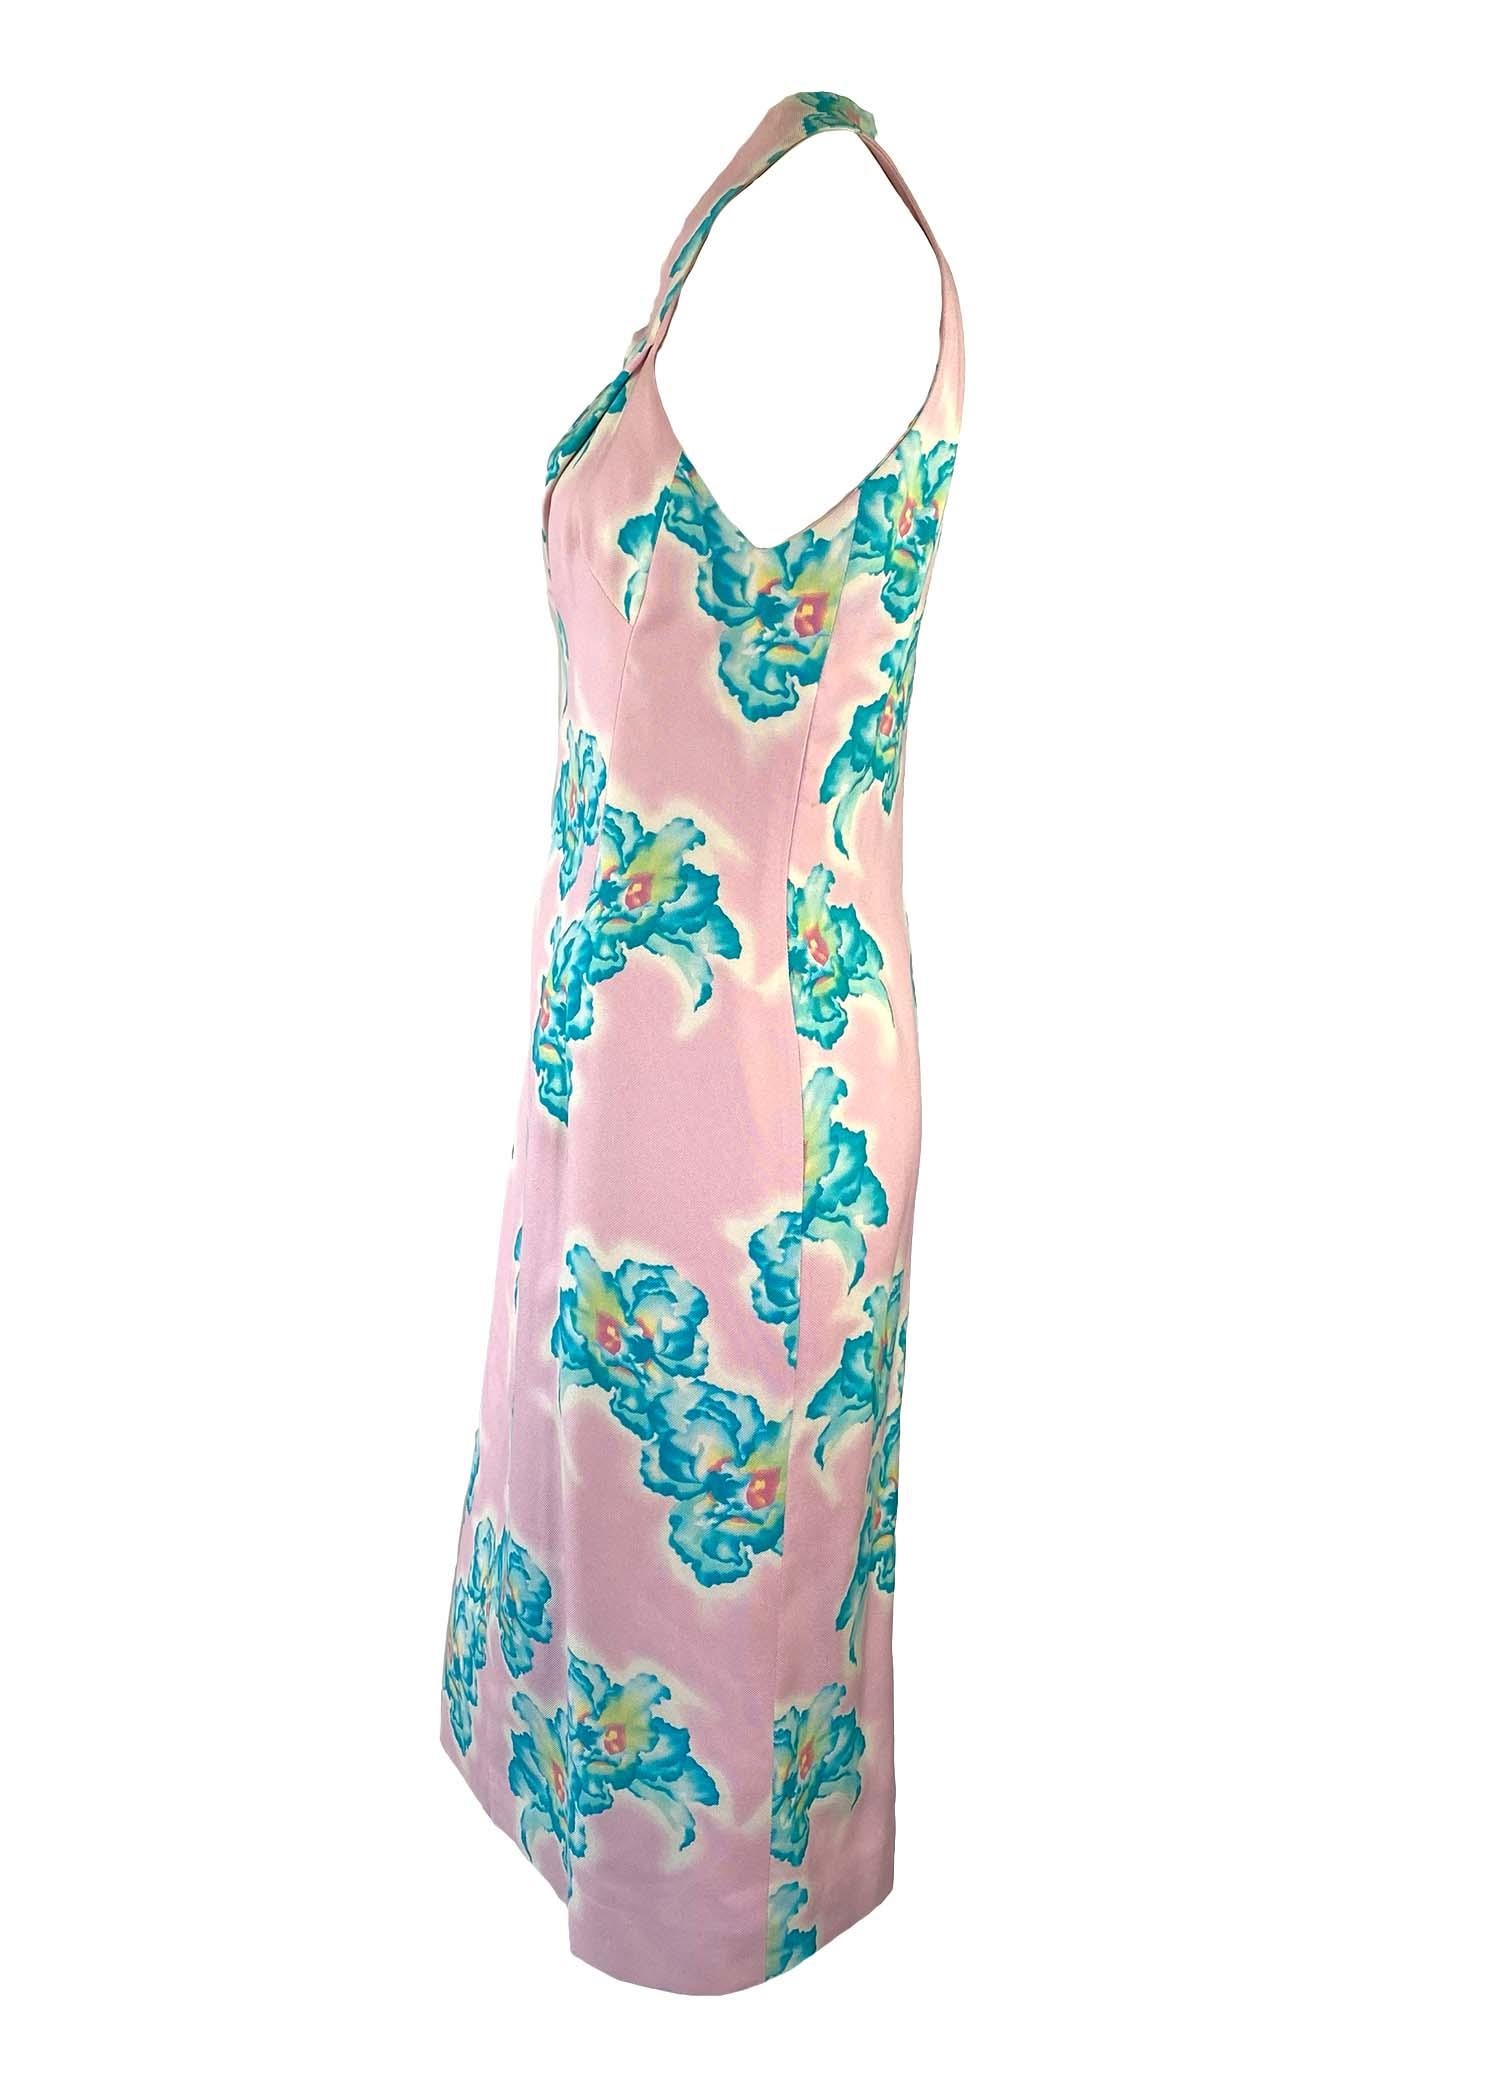 S/S 1999 Gianni Versace by Donatella Pink Halter Neck Blue Floral Dress  In Good Condition For Sale In West Hollywood, CA